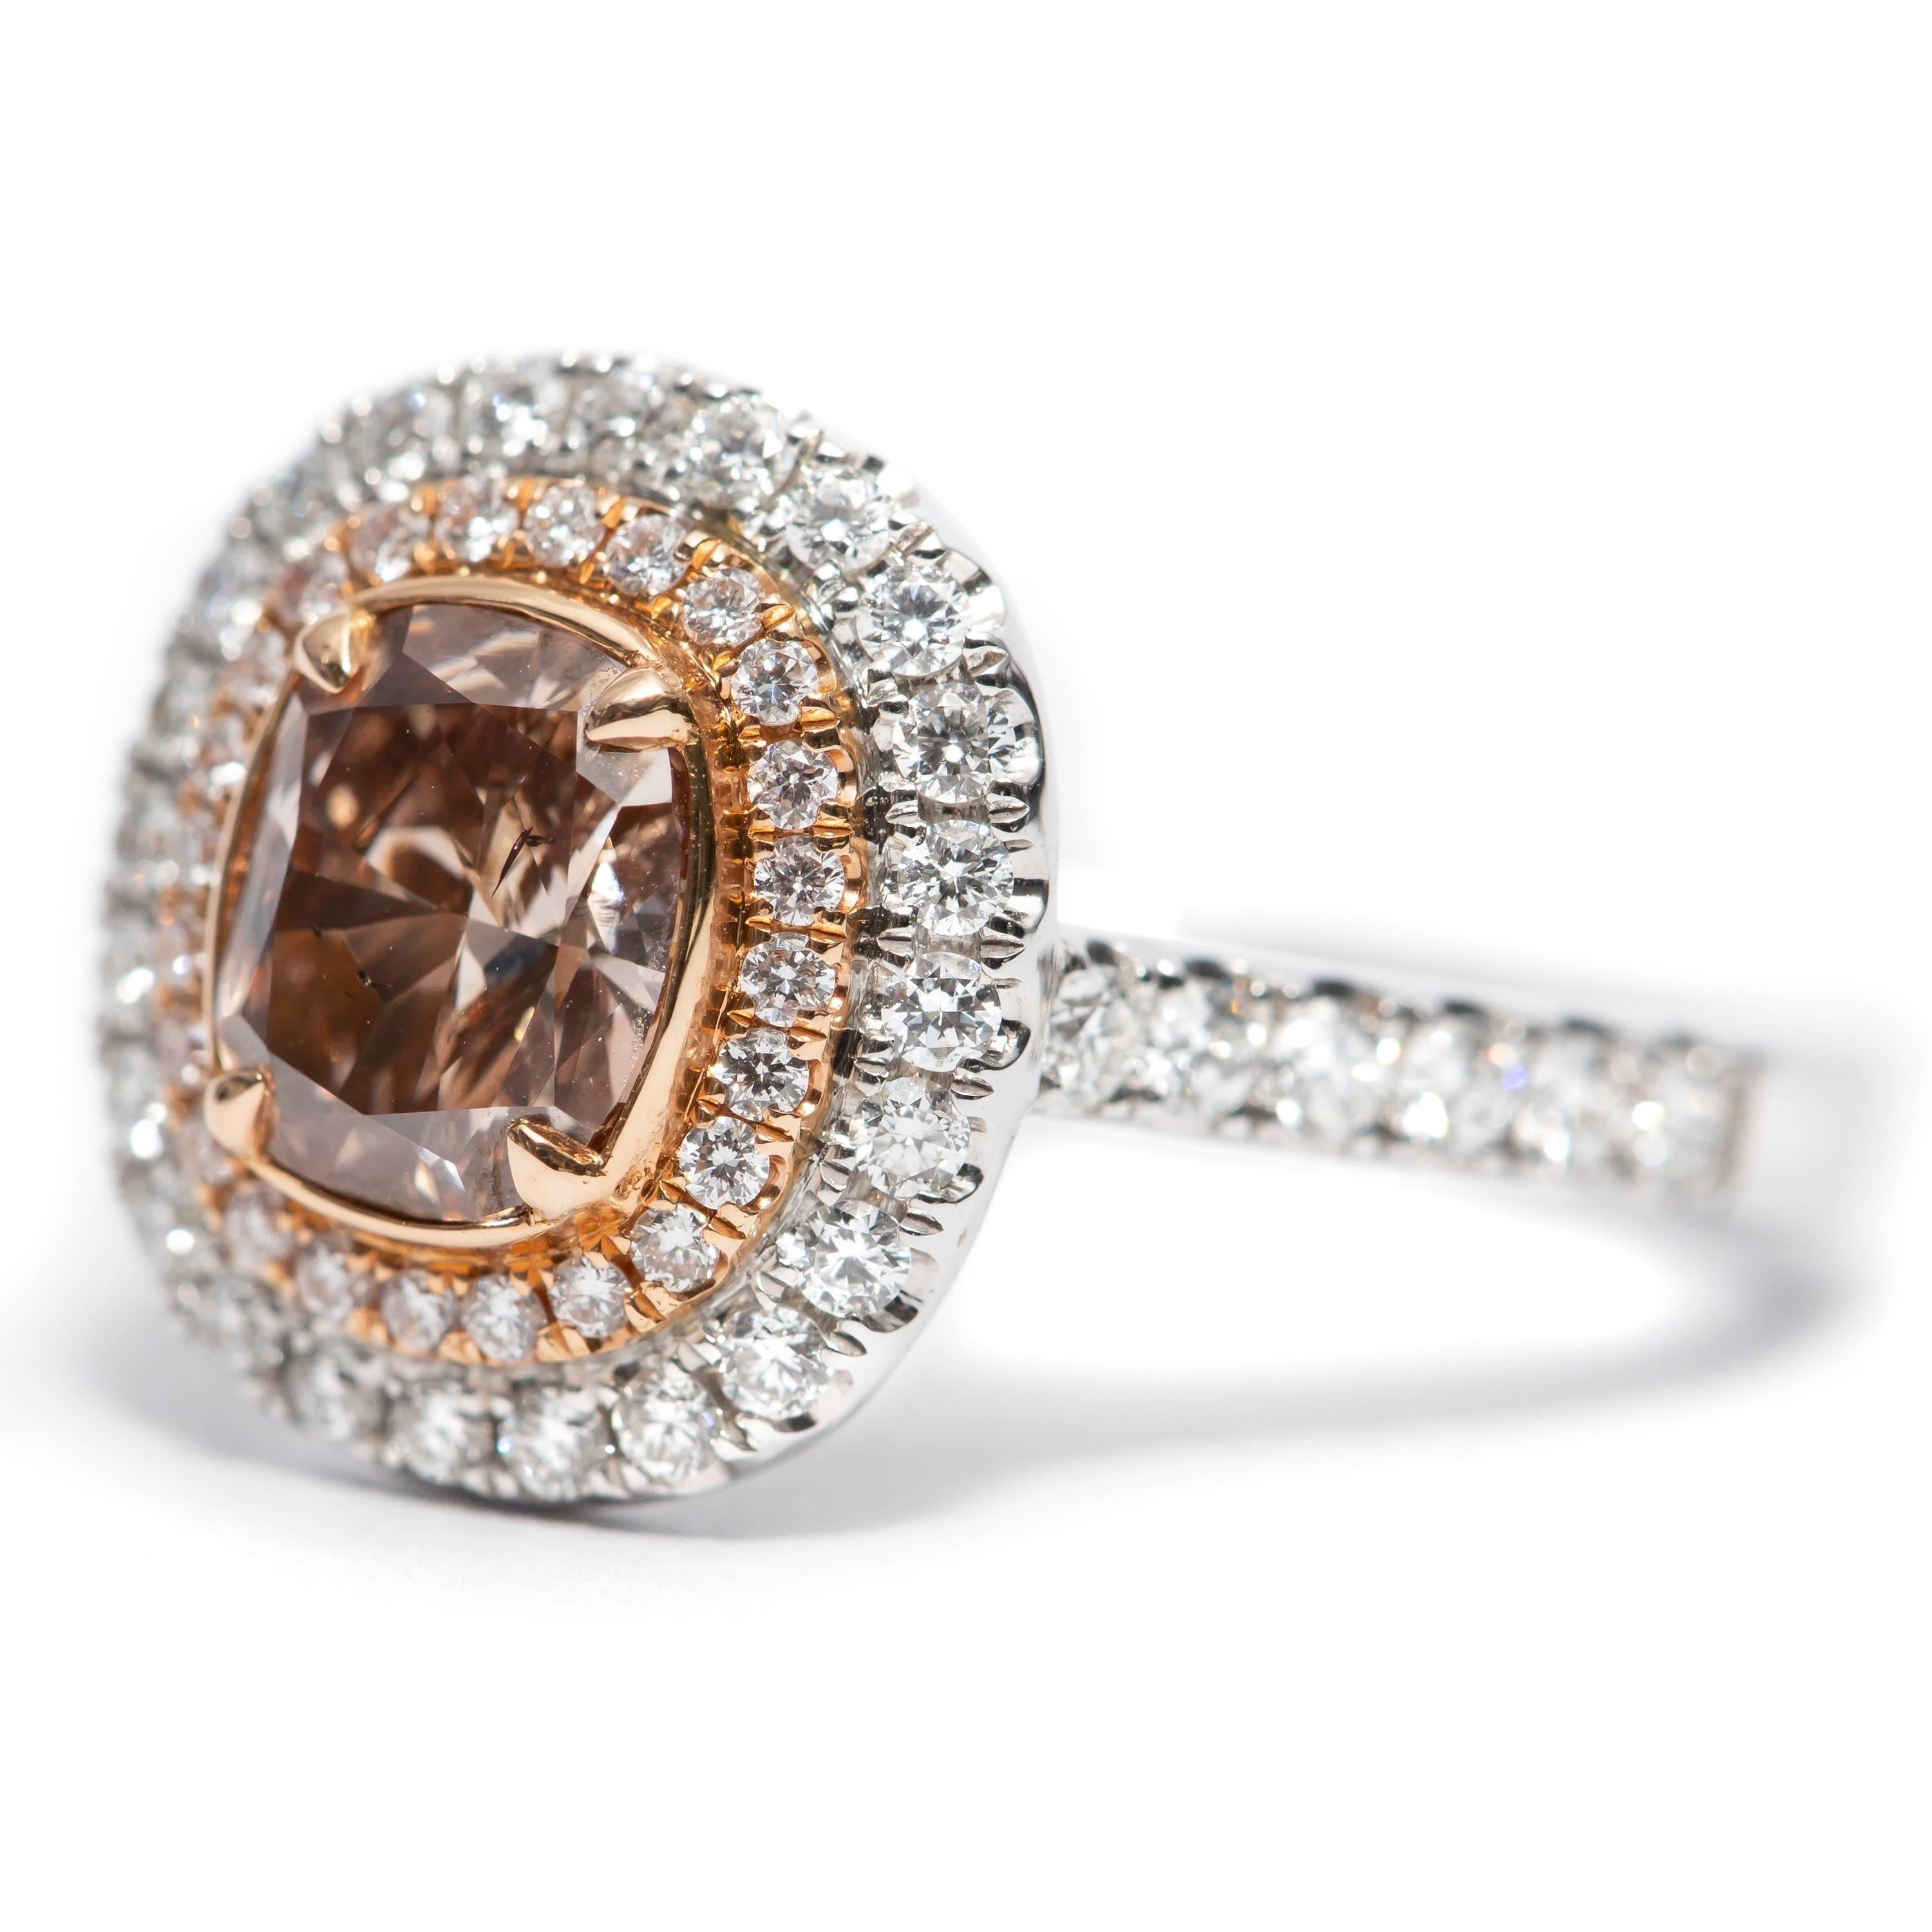 This Stunning GIA Certified 1.02 Carat Fancy Orange Brown Clarity SI2 Cushion Cut Diamond Engagement Ring features 0.63 Carat of Round White Brilliant Diamonds in a double halo and flowing down the shoulders set in 18 Karat White Gold. UK size M,